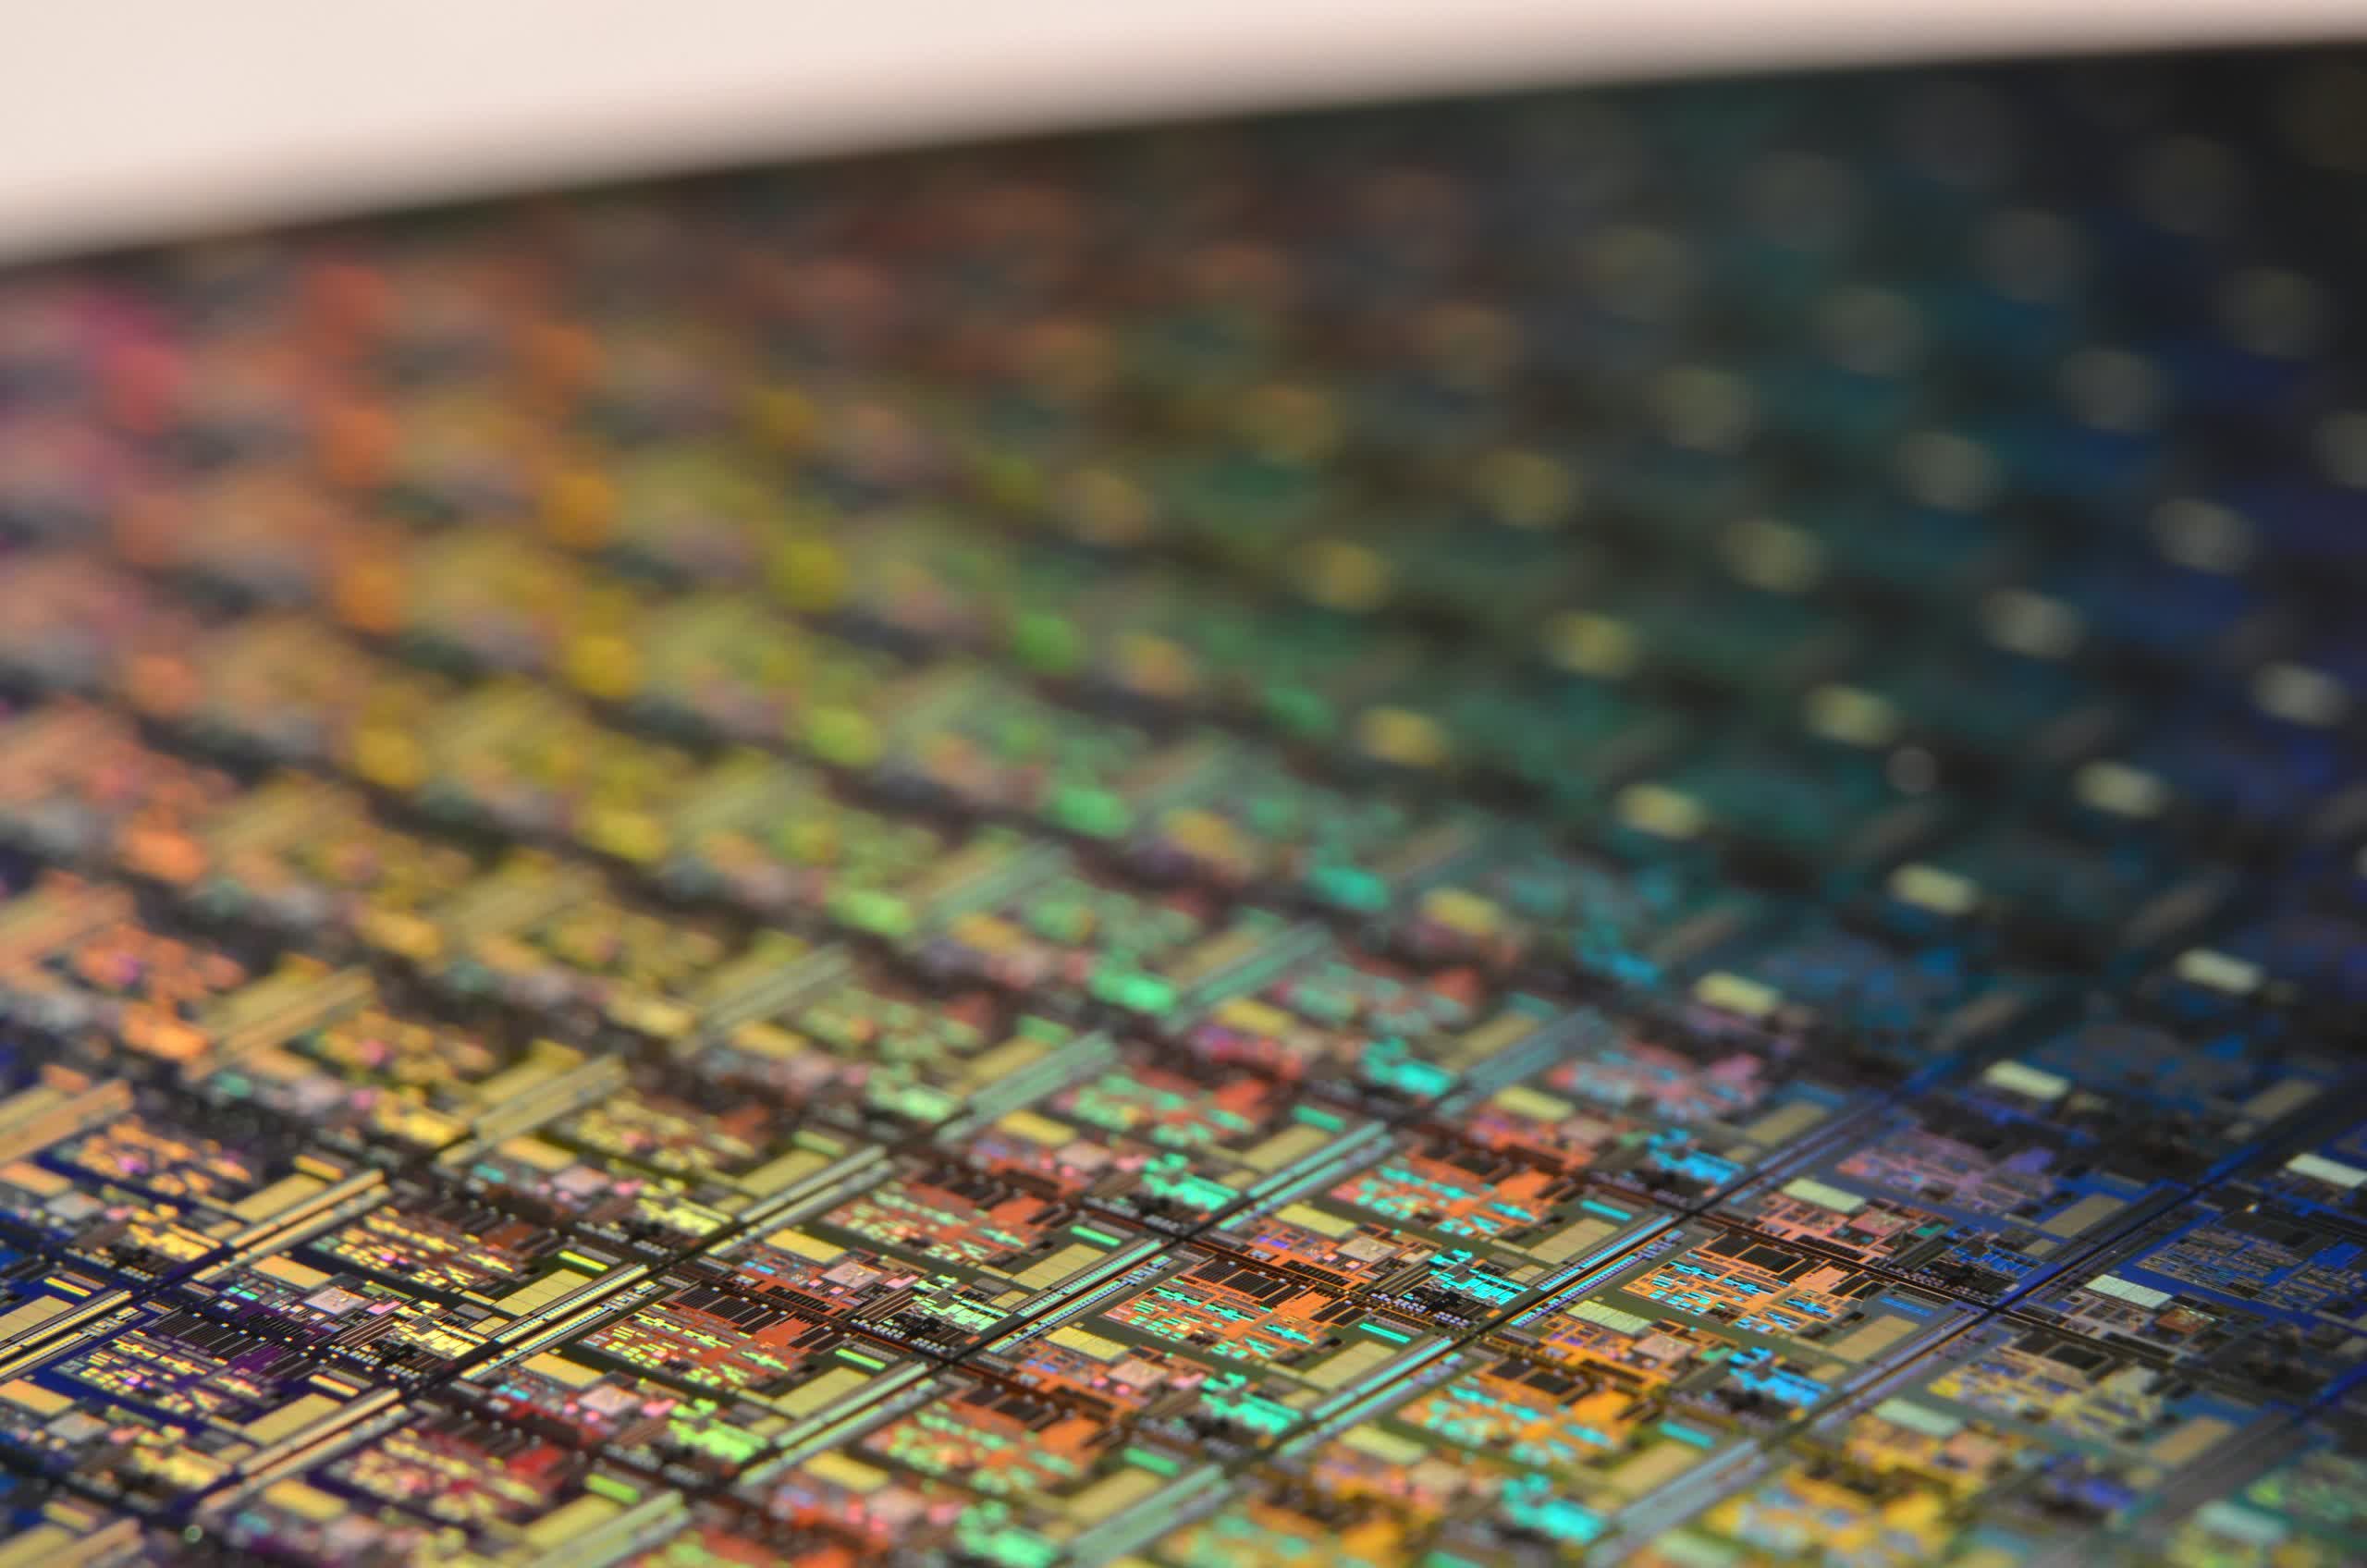 Intel buys Israeli specialty chipmaker Tower Semiconductor for $5.4 billion